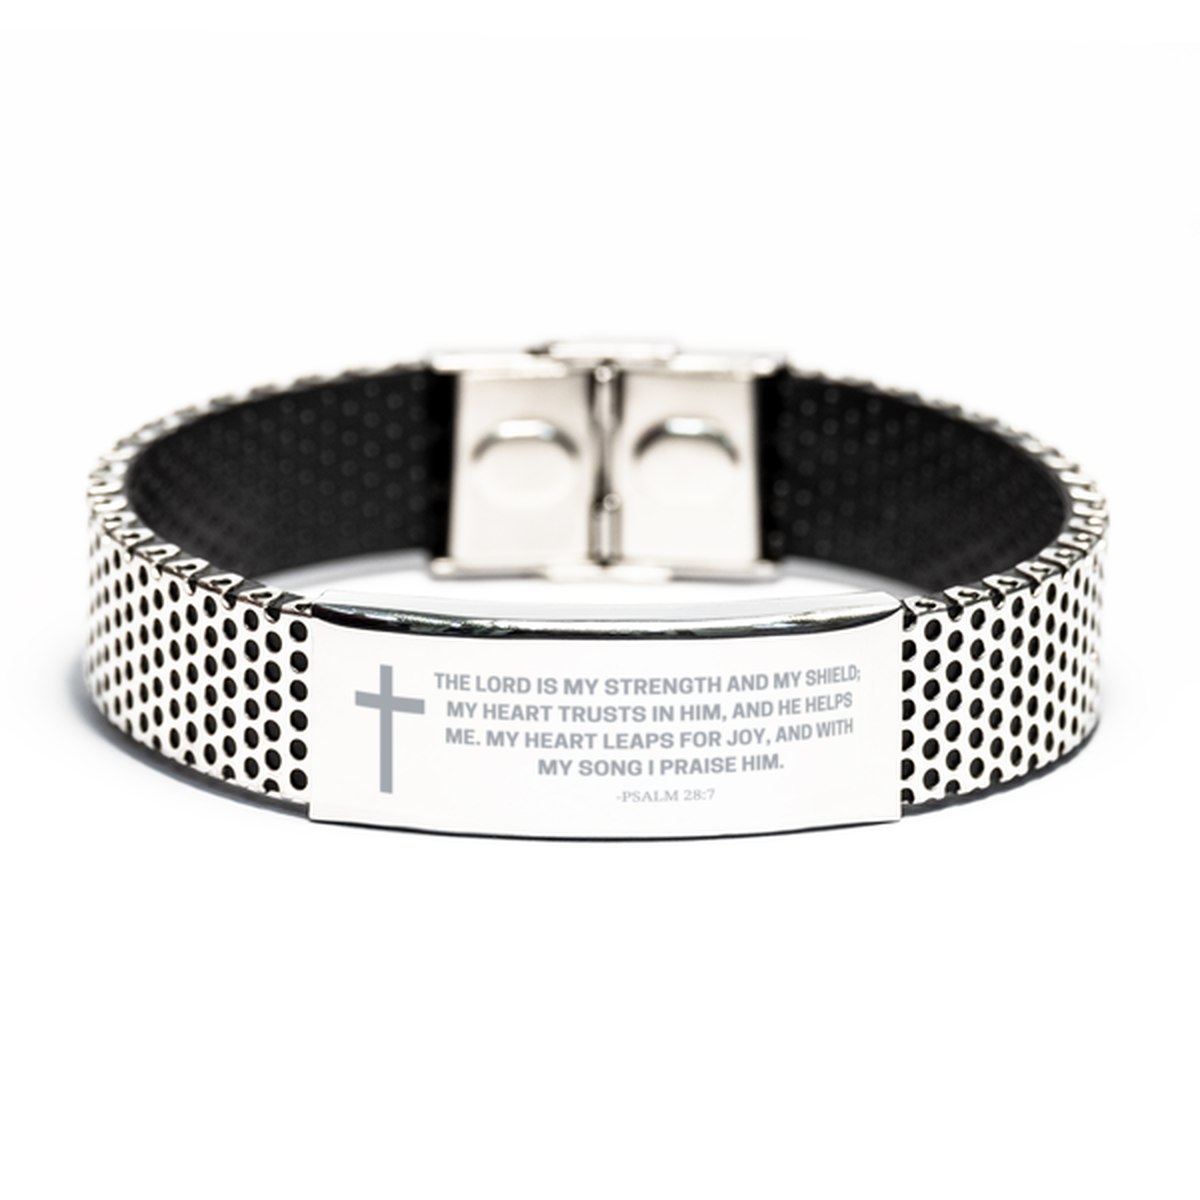 Baptism Gifts For Teenage Boys Girls, Christian Bible Verse Stainless Steel Bracelet, The Lord is my strength and my shield, Catholic Confirmation Gifts for Son, Godson, Grandson, Nephew